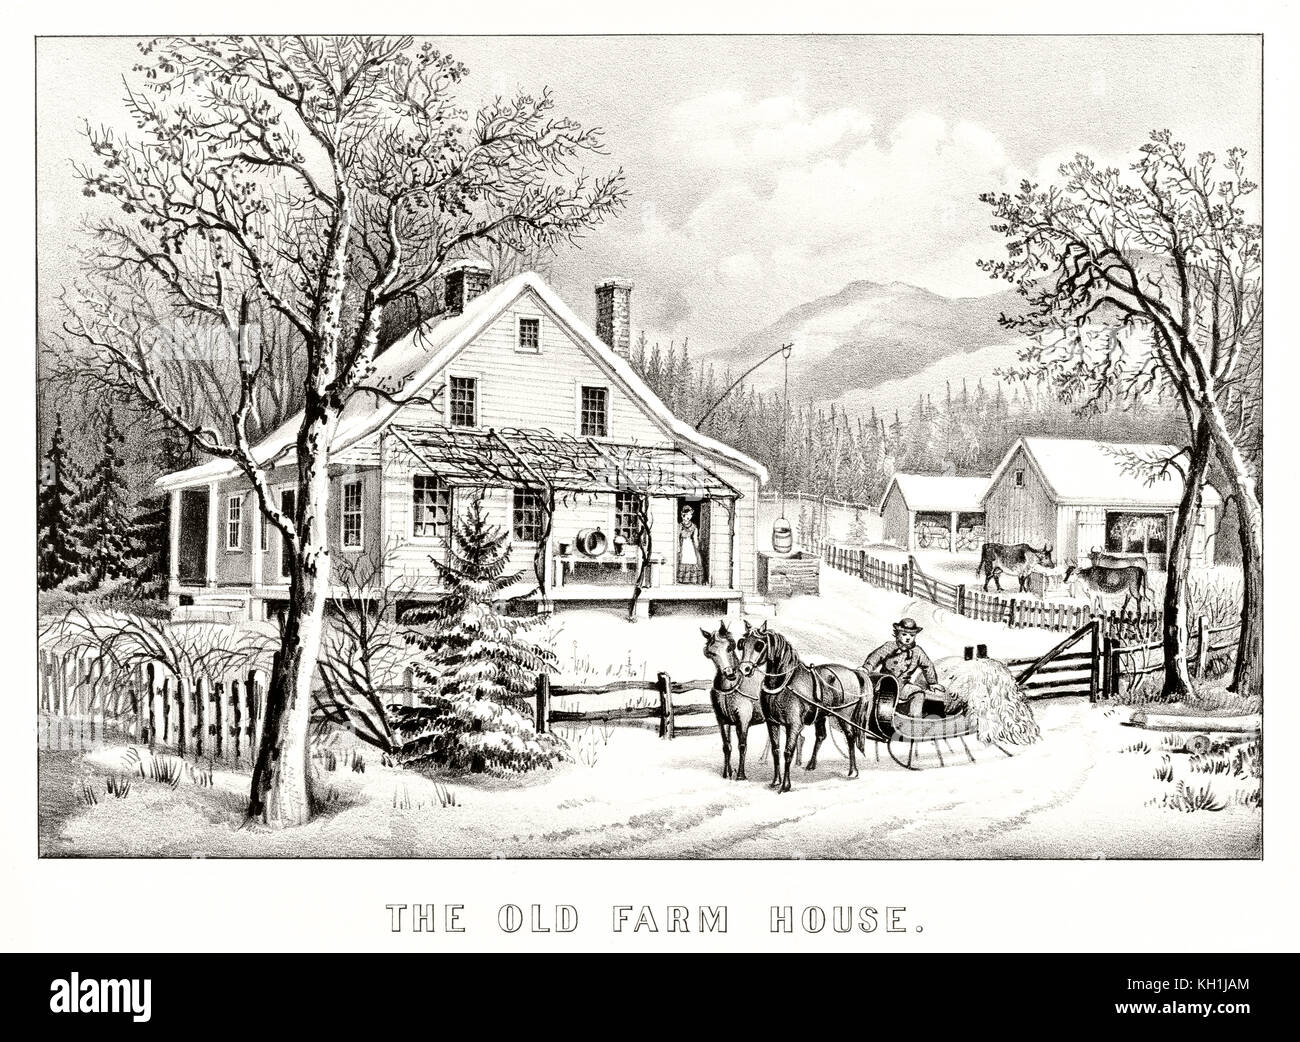 Antique illustration of an old farm house. By Currier & Ives, publ. in New York, 1872 Stock Photo